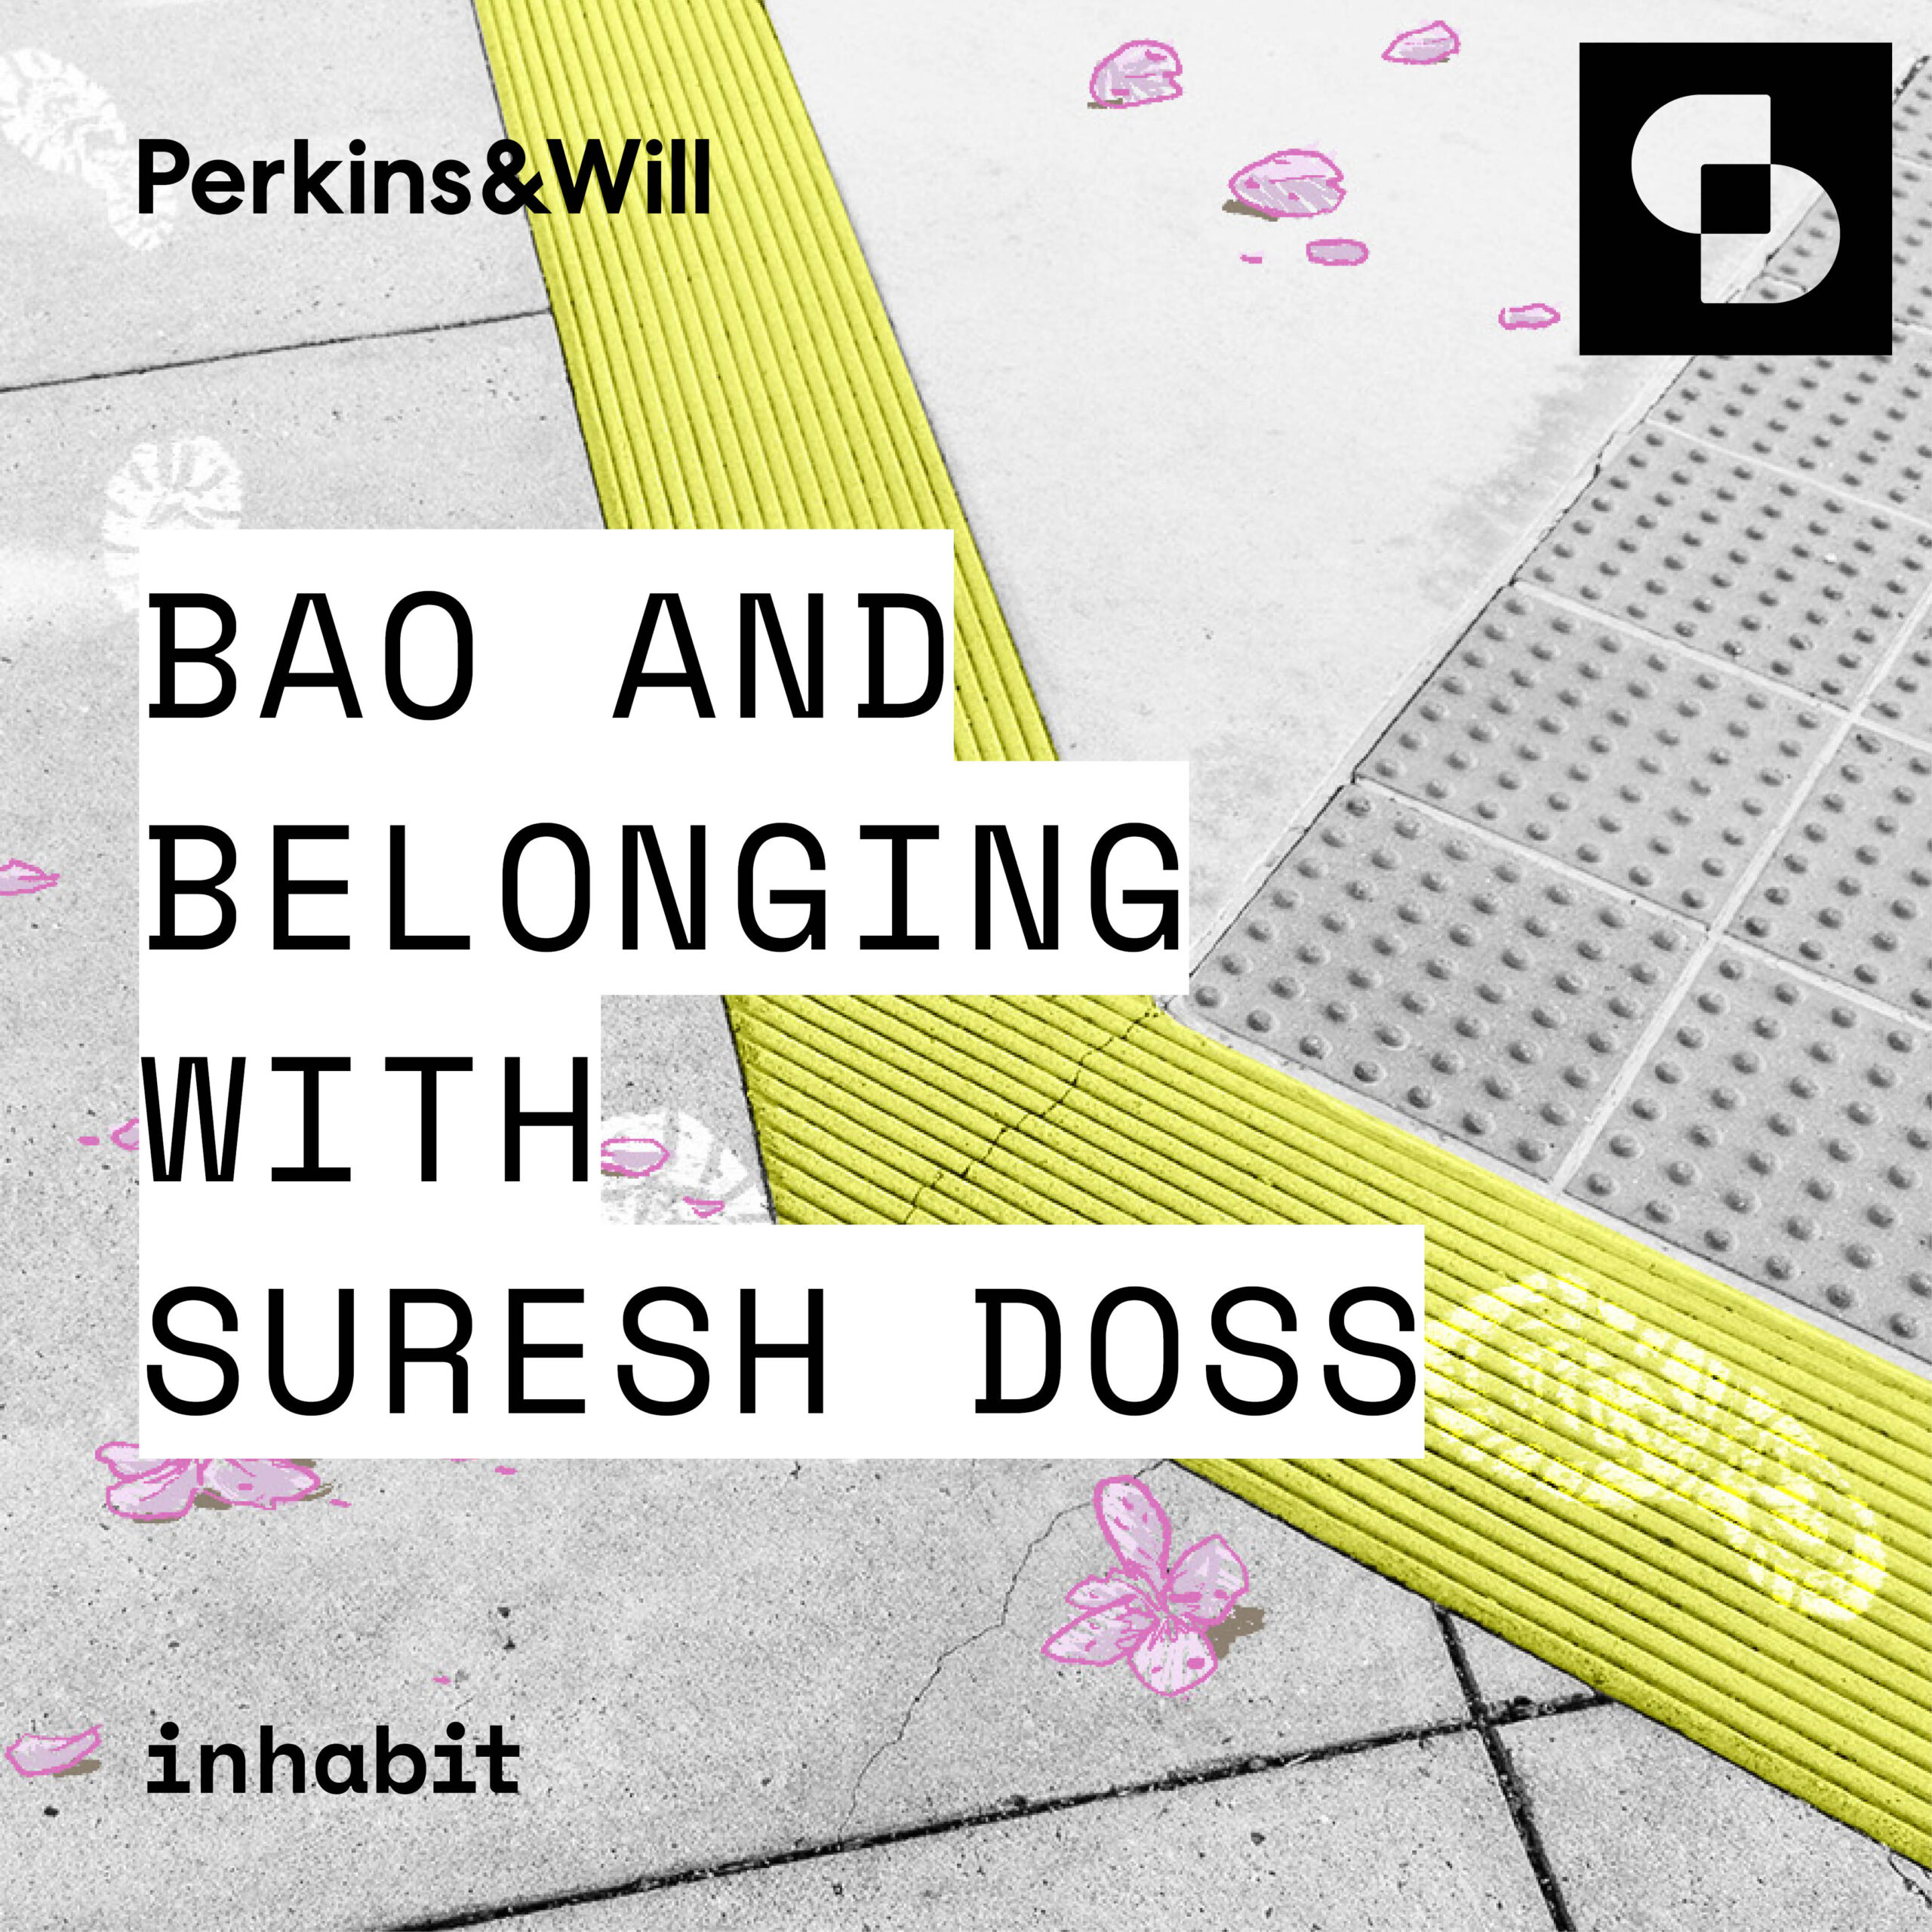 Cover art for Inhabit Series 3 "Bao and Belonging with Suresh Doss": gray sidewalk with tactile paving, cherry blossoms, and white sneaker footprints.